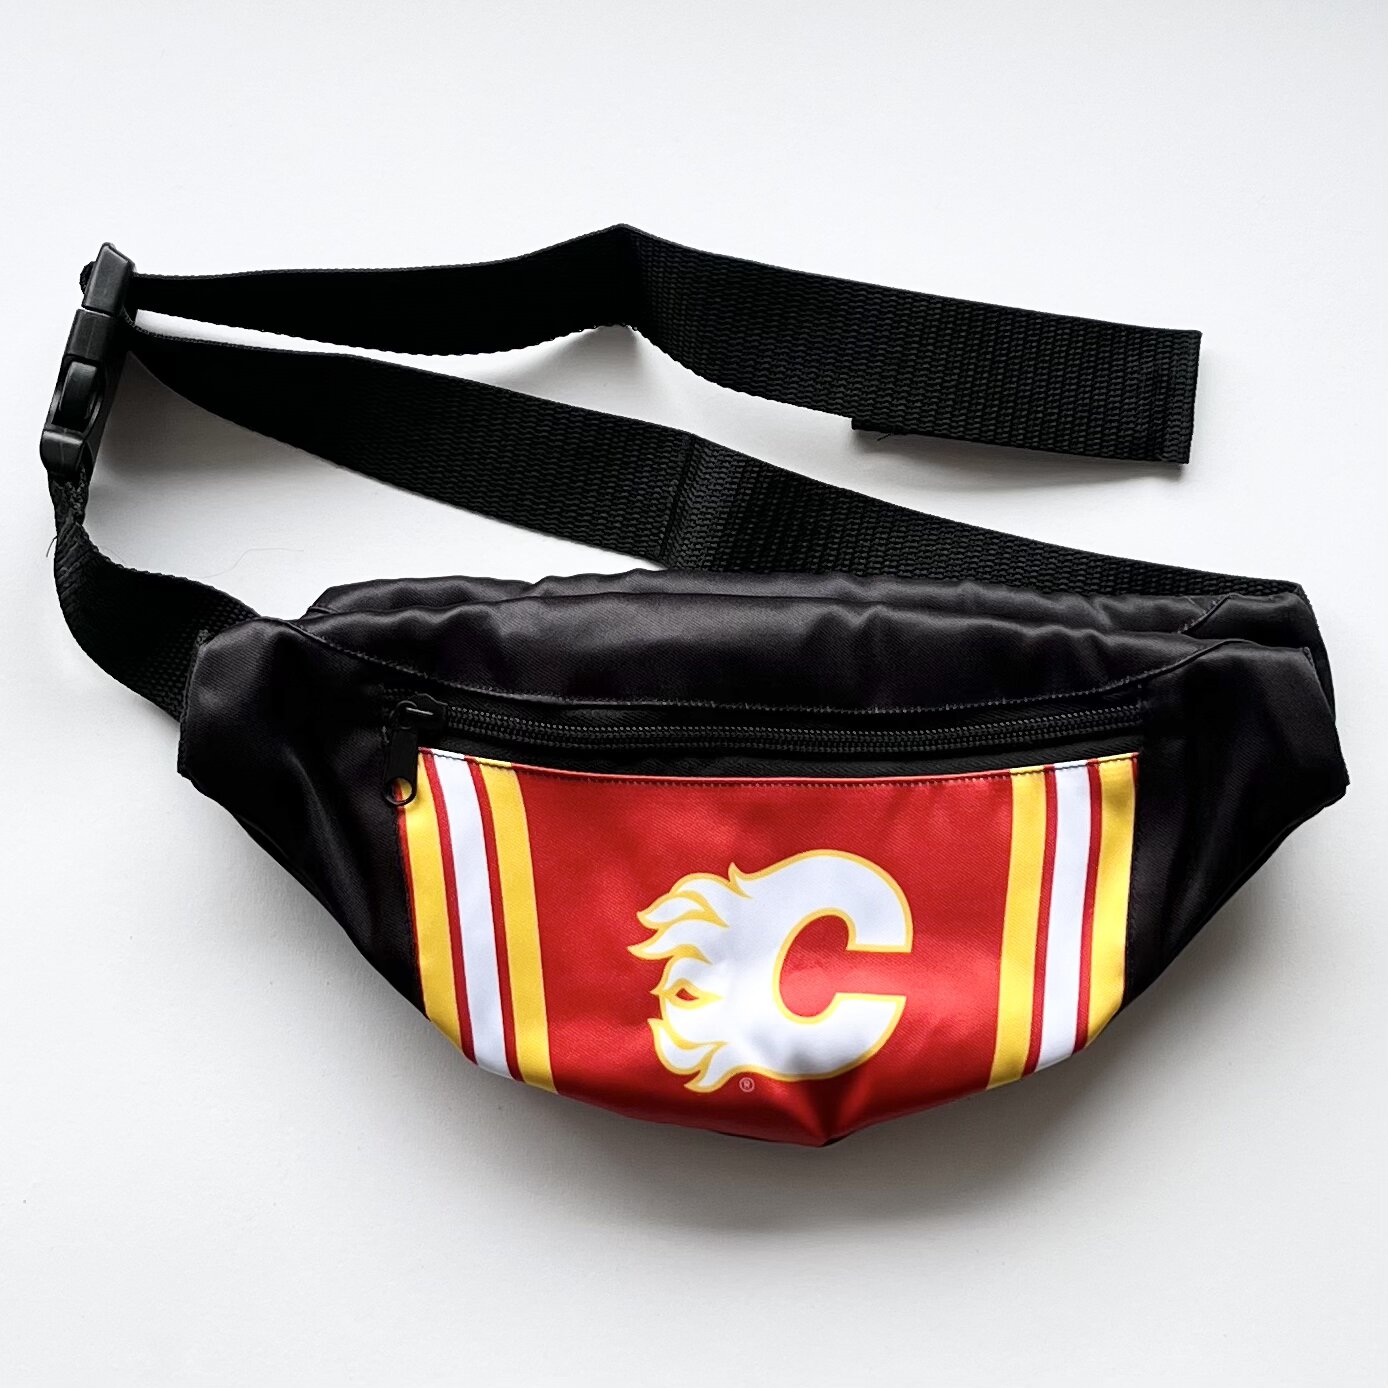 Officially Licensed NHL Fanny Pack - Calgary Flames